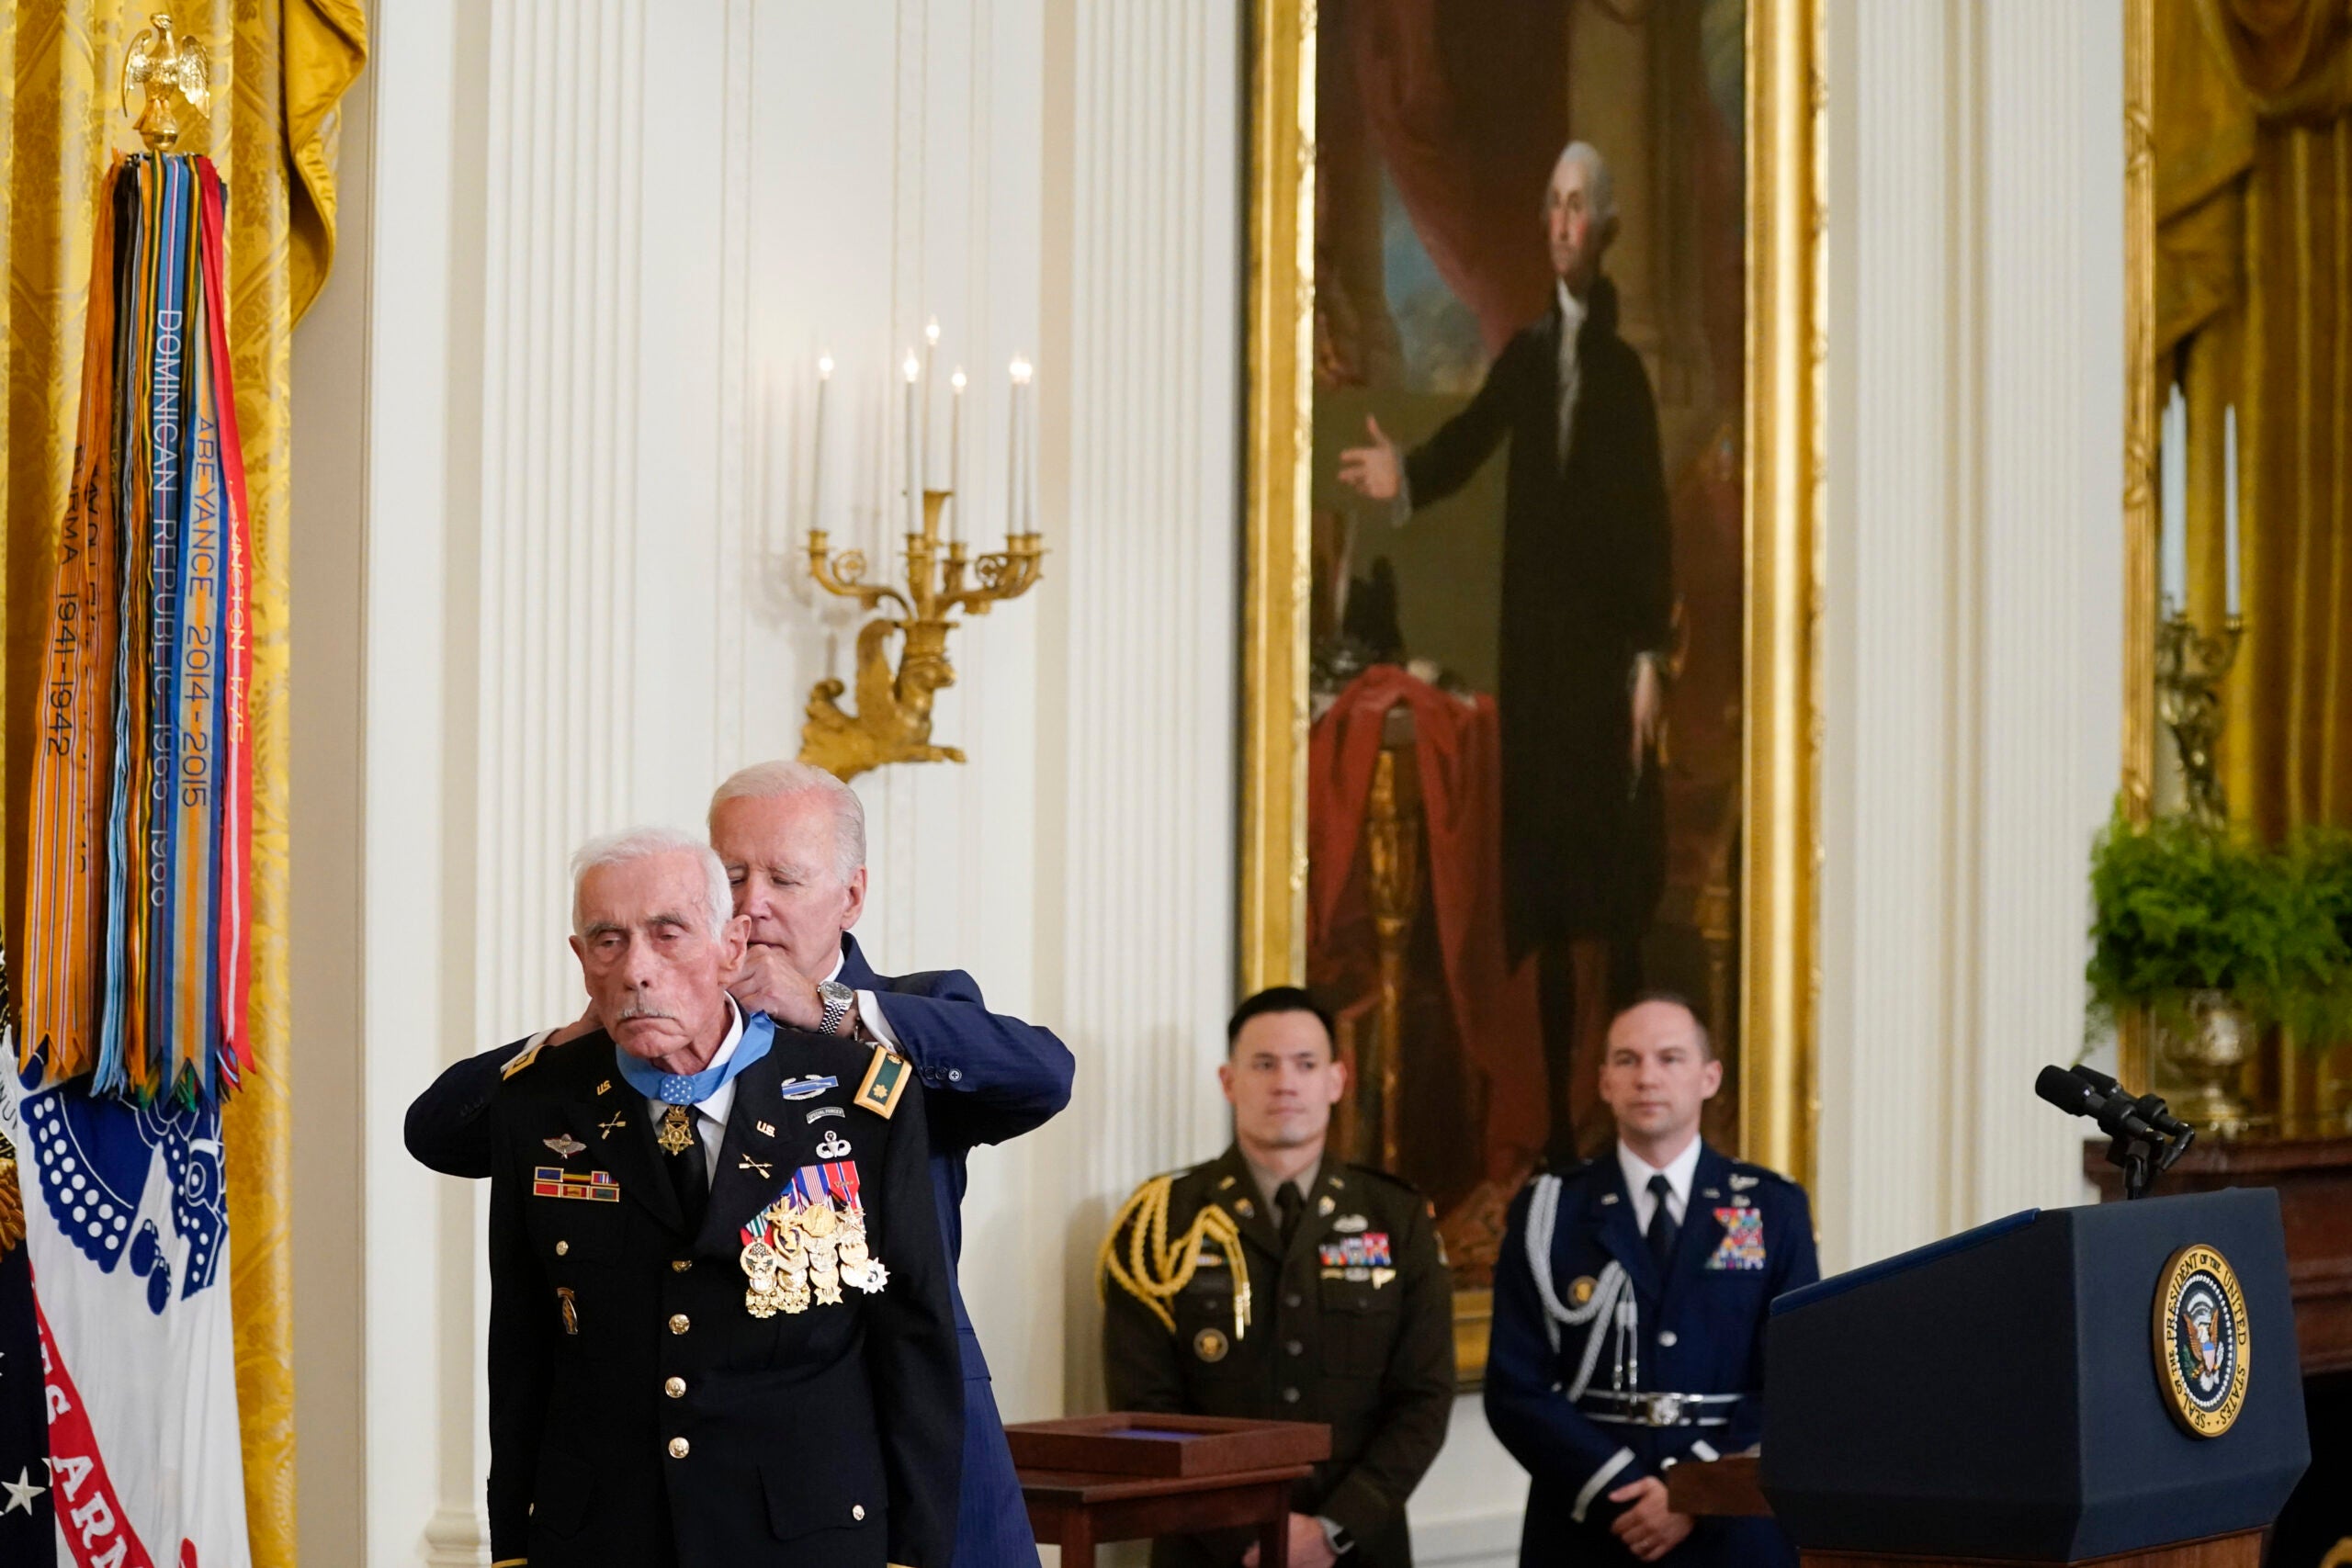 These 4 soldiers just received the Medal of Honor for standing between their men and enemy fire